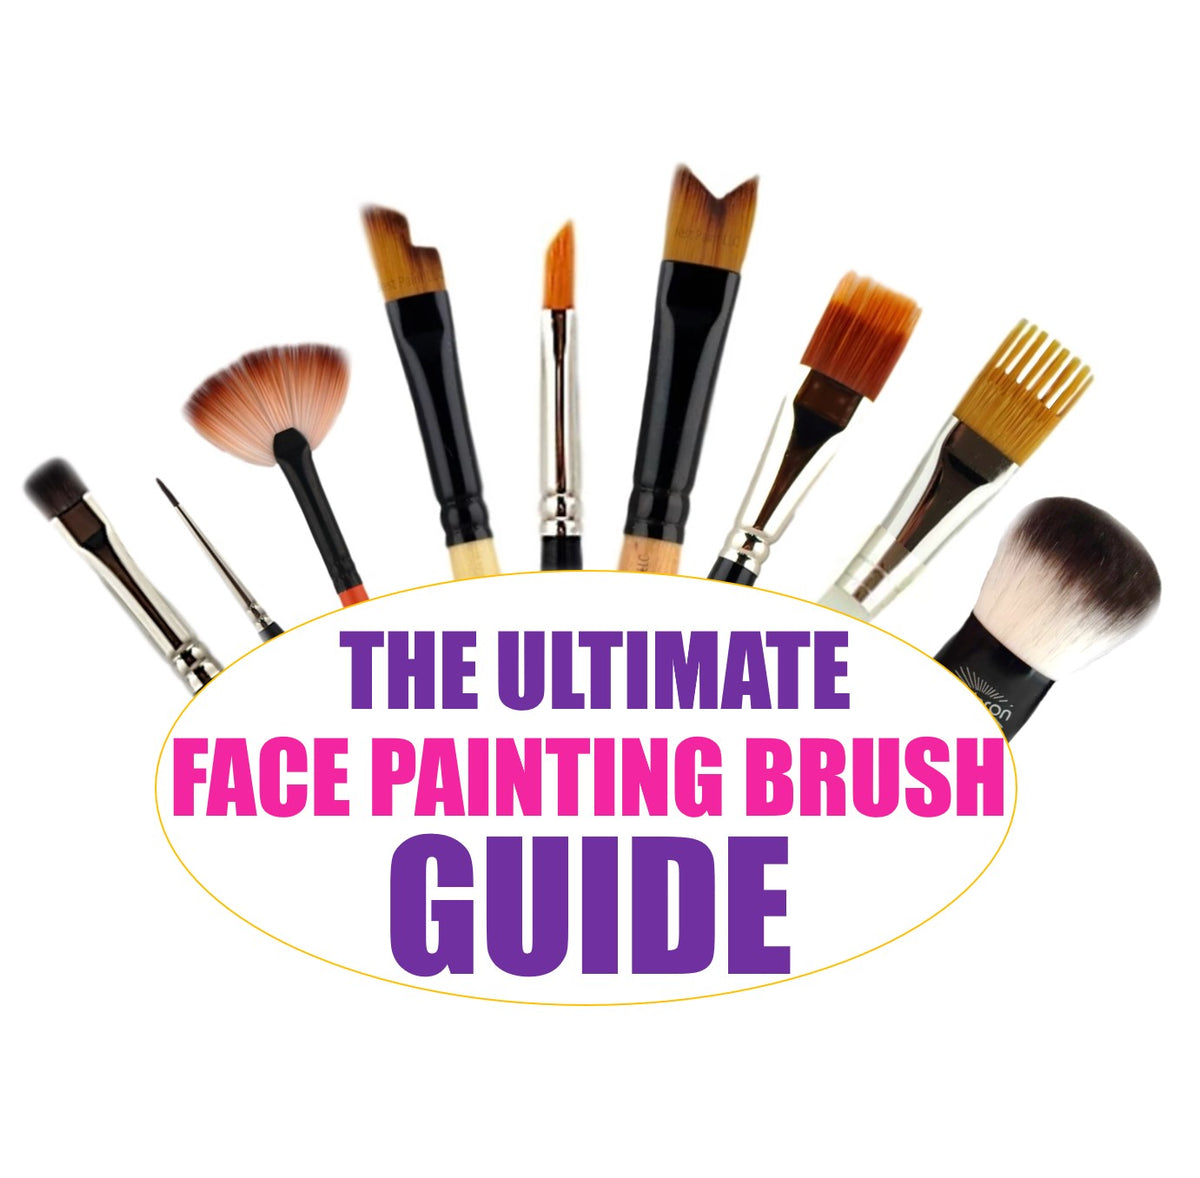 The Ultimate Face Painting Brush Guide